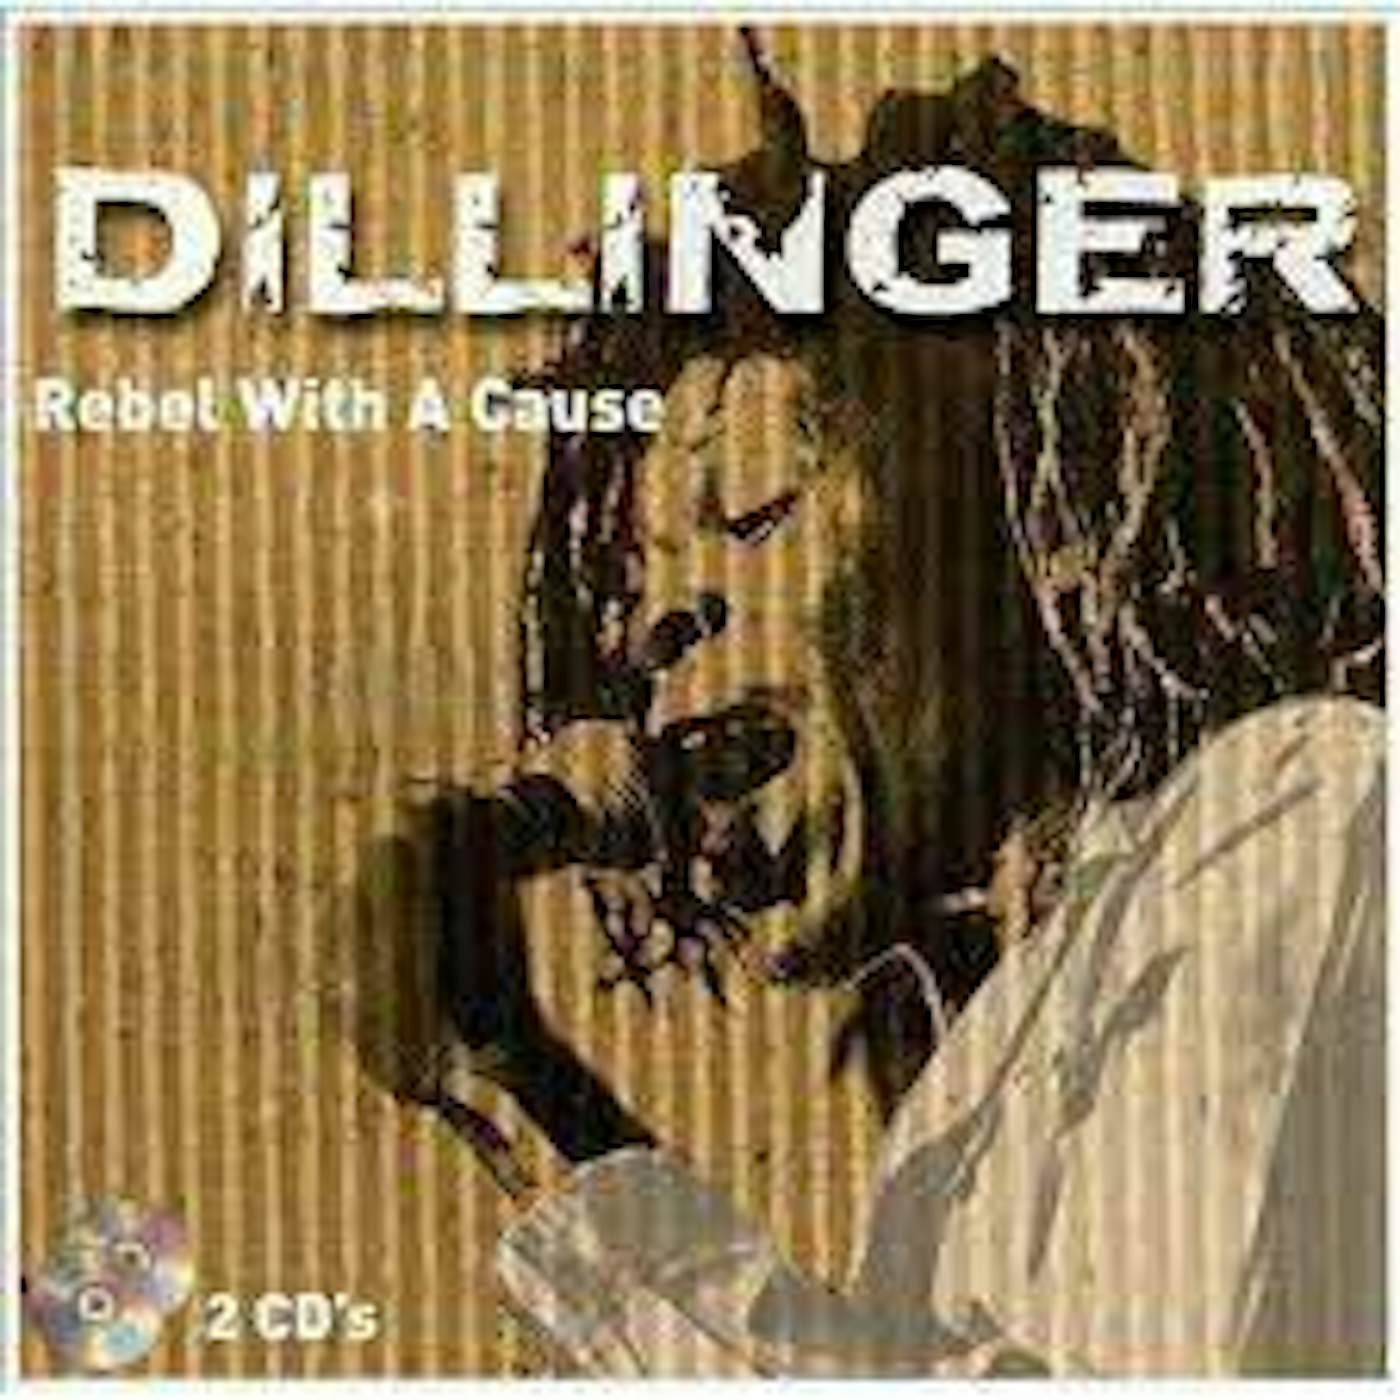 Dillinger REBEL WITH A CAUSE CD